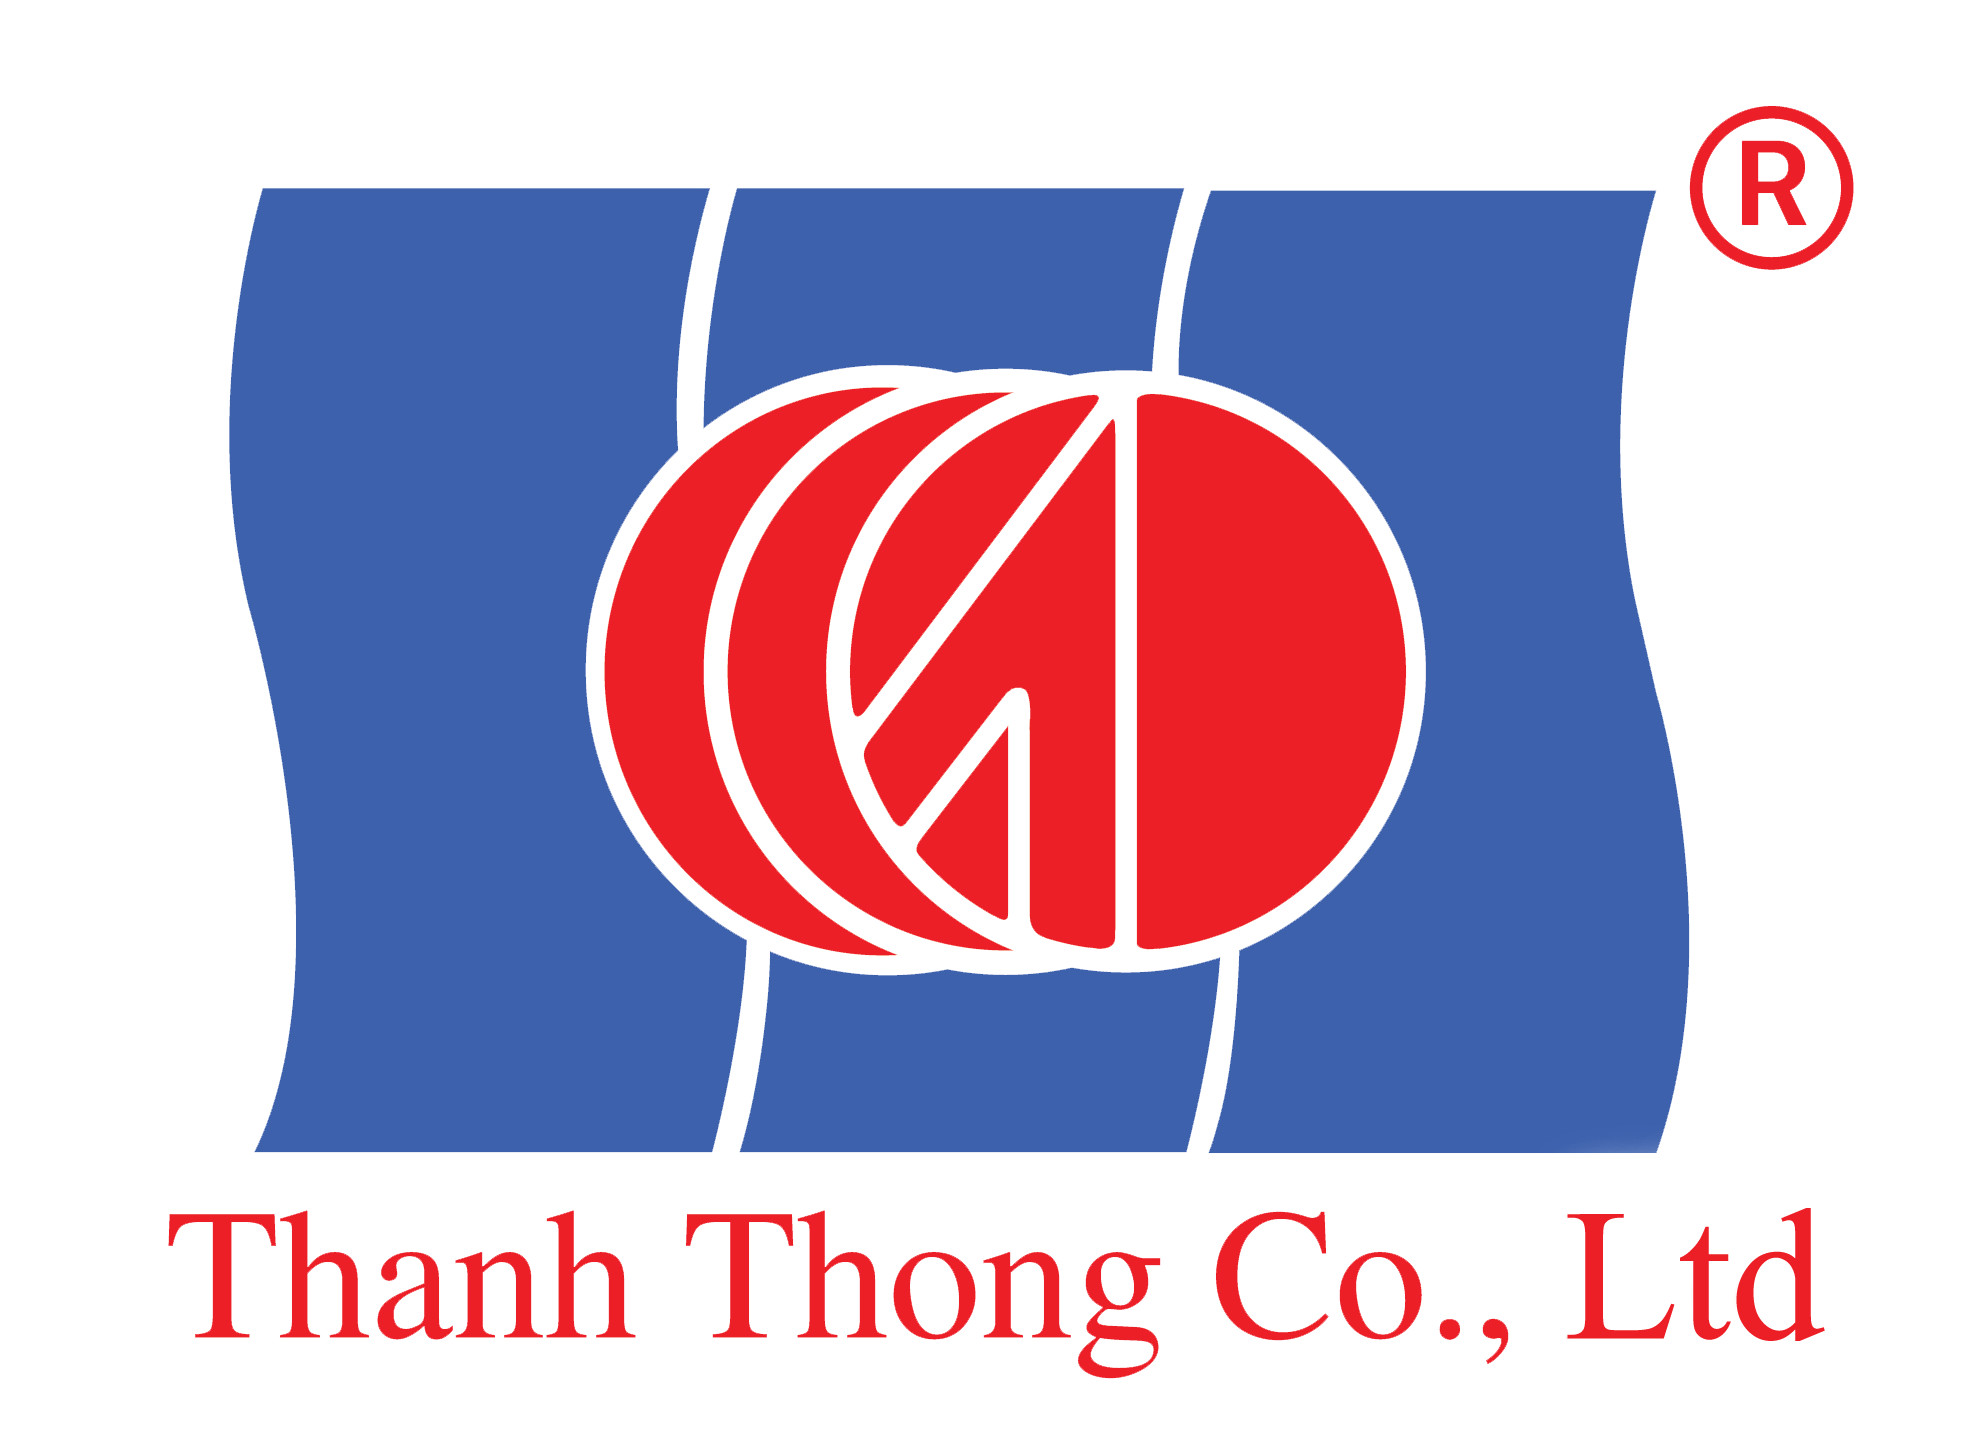 THANH THONG MANUFACTURING TRADING COMPANY LIMITED - HawaExpo